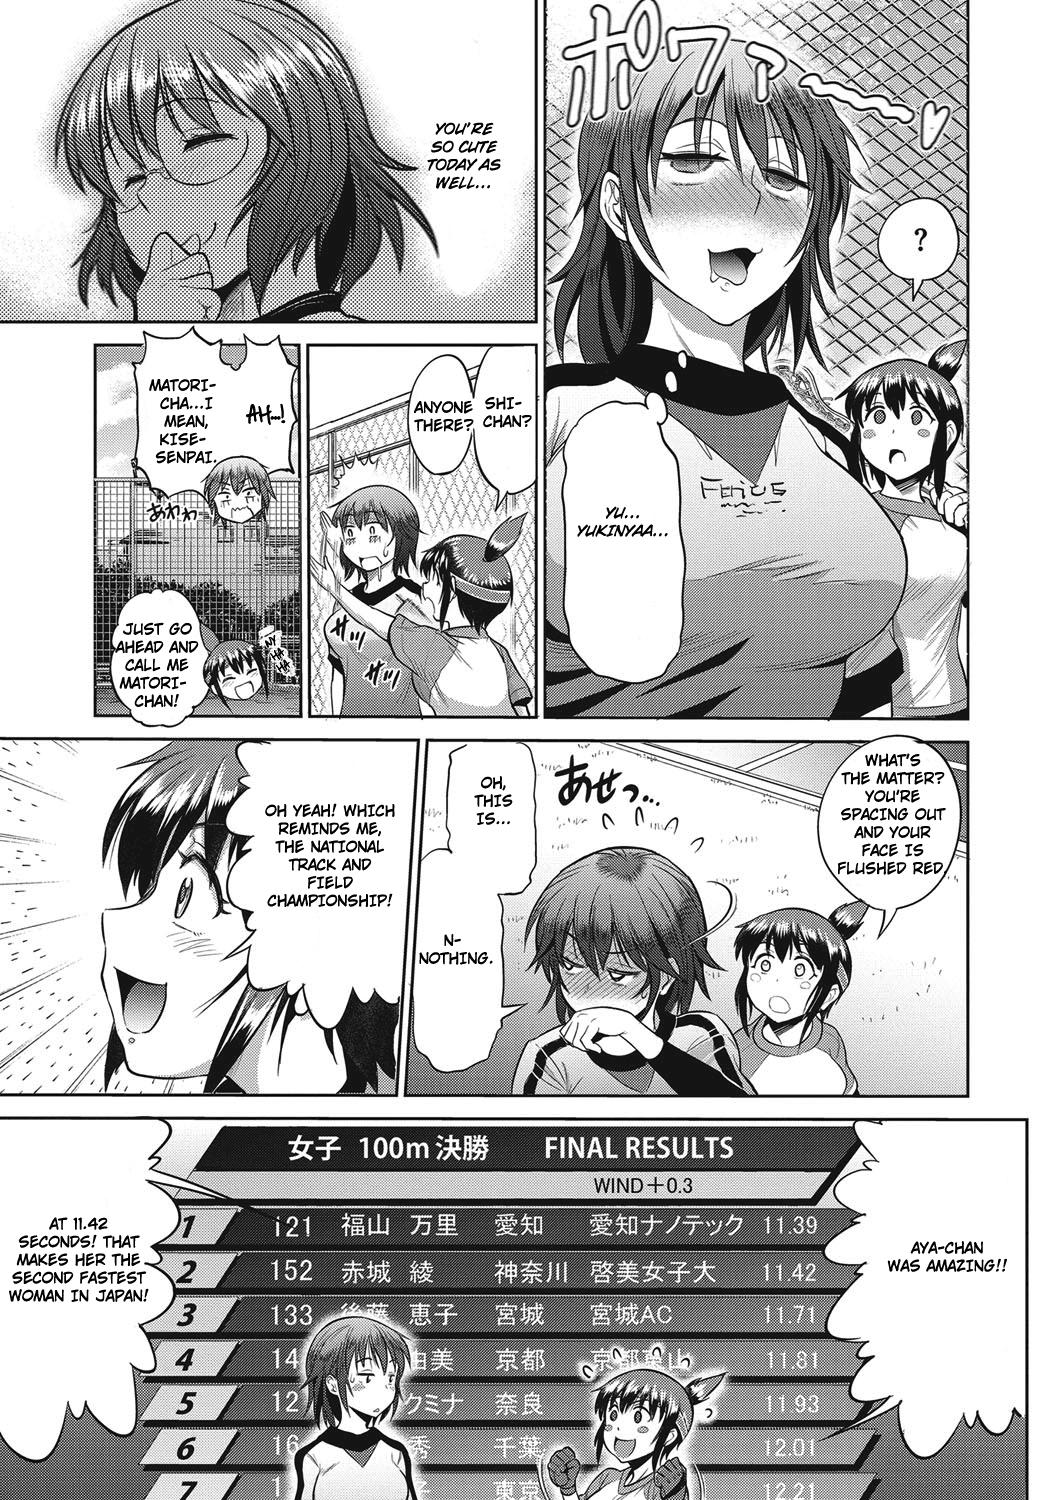 Thief [DISTANCE] Joshi Lacu! - Girls Lacrosse Club ~2 Years Later~ Ch. 3 (COMIC ExE 04) [English] [TripleSevenScans] [Digital] Oiled - Page 11